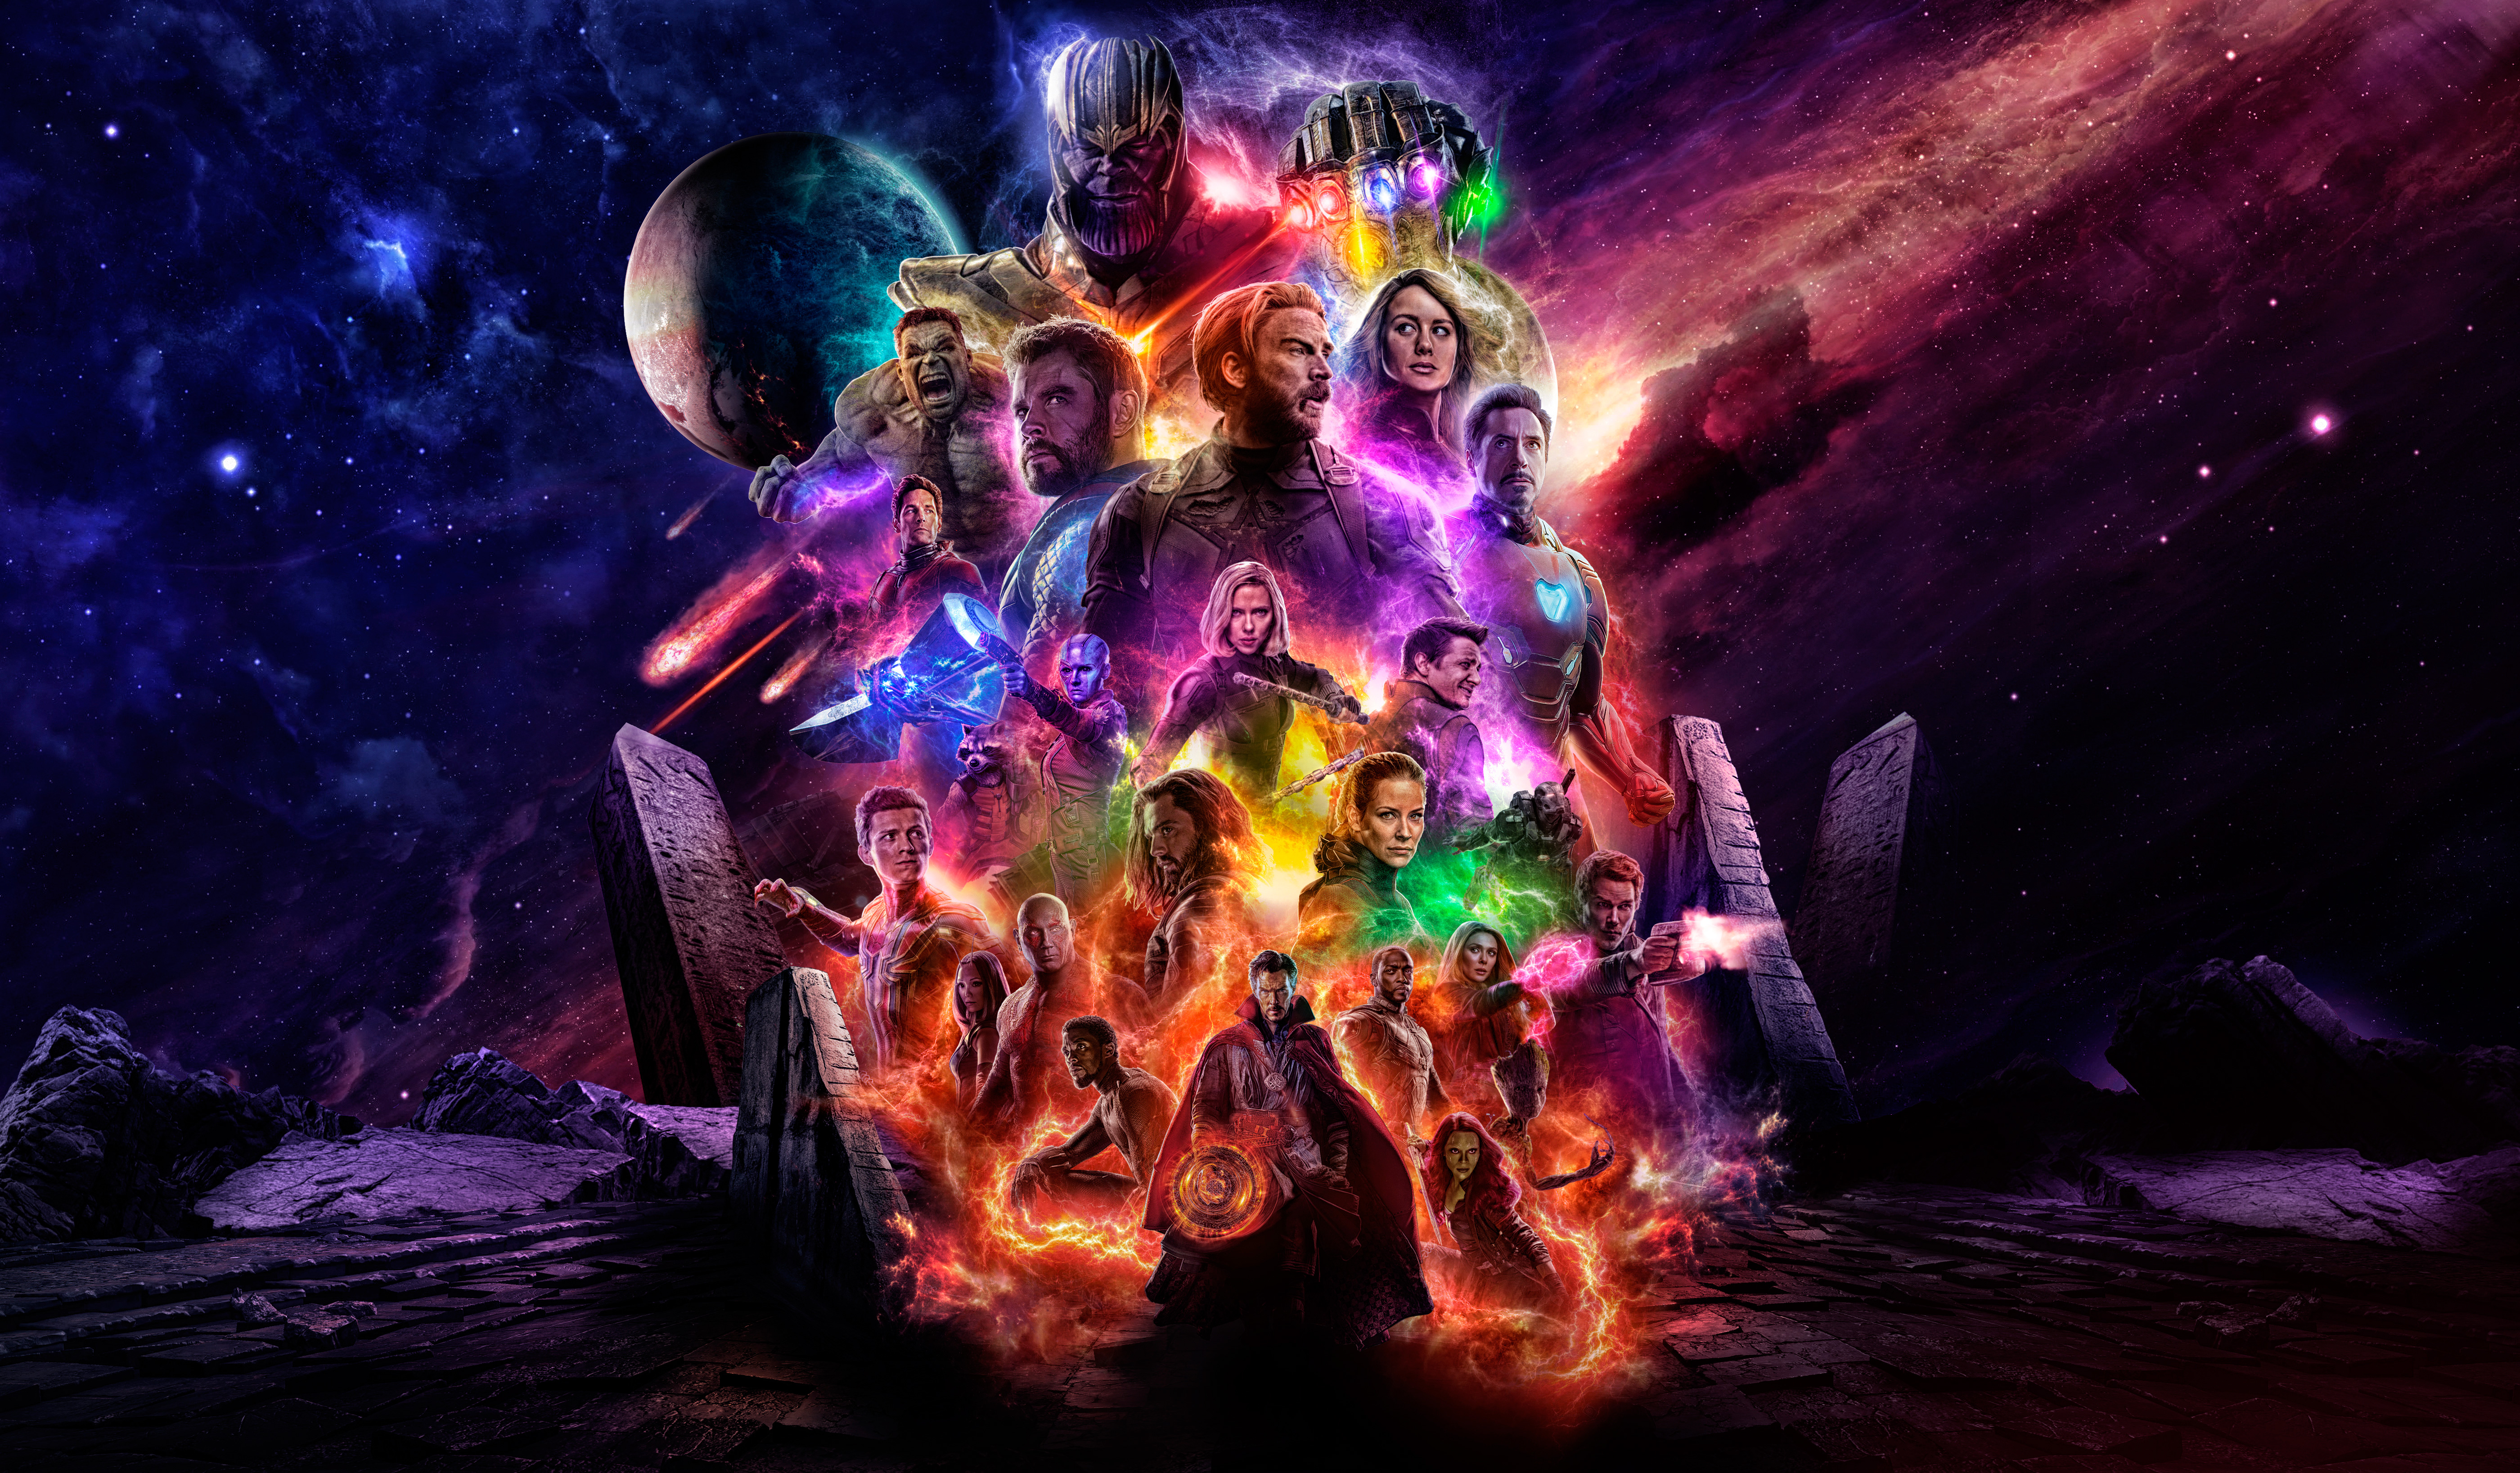 300+ Avengers Endgame HD Wallpapers and Backgrounds